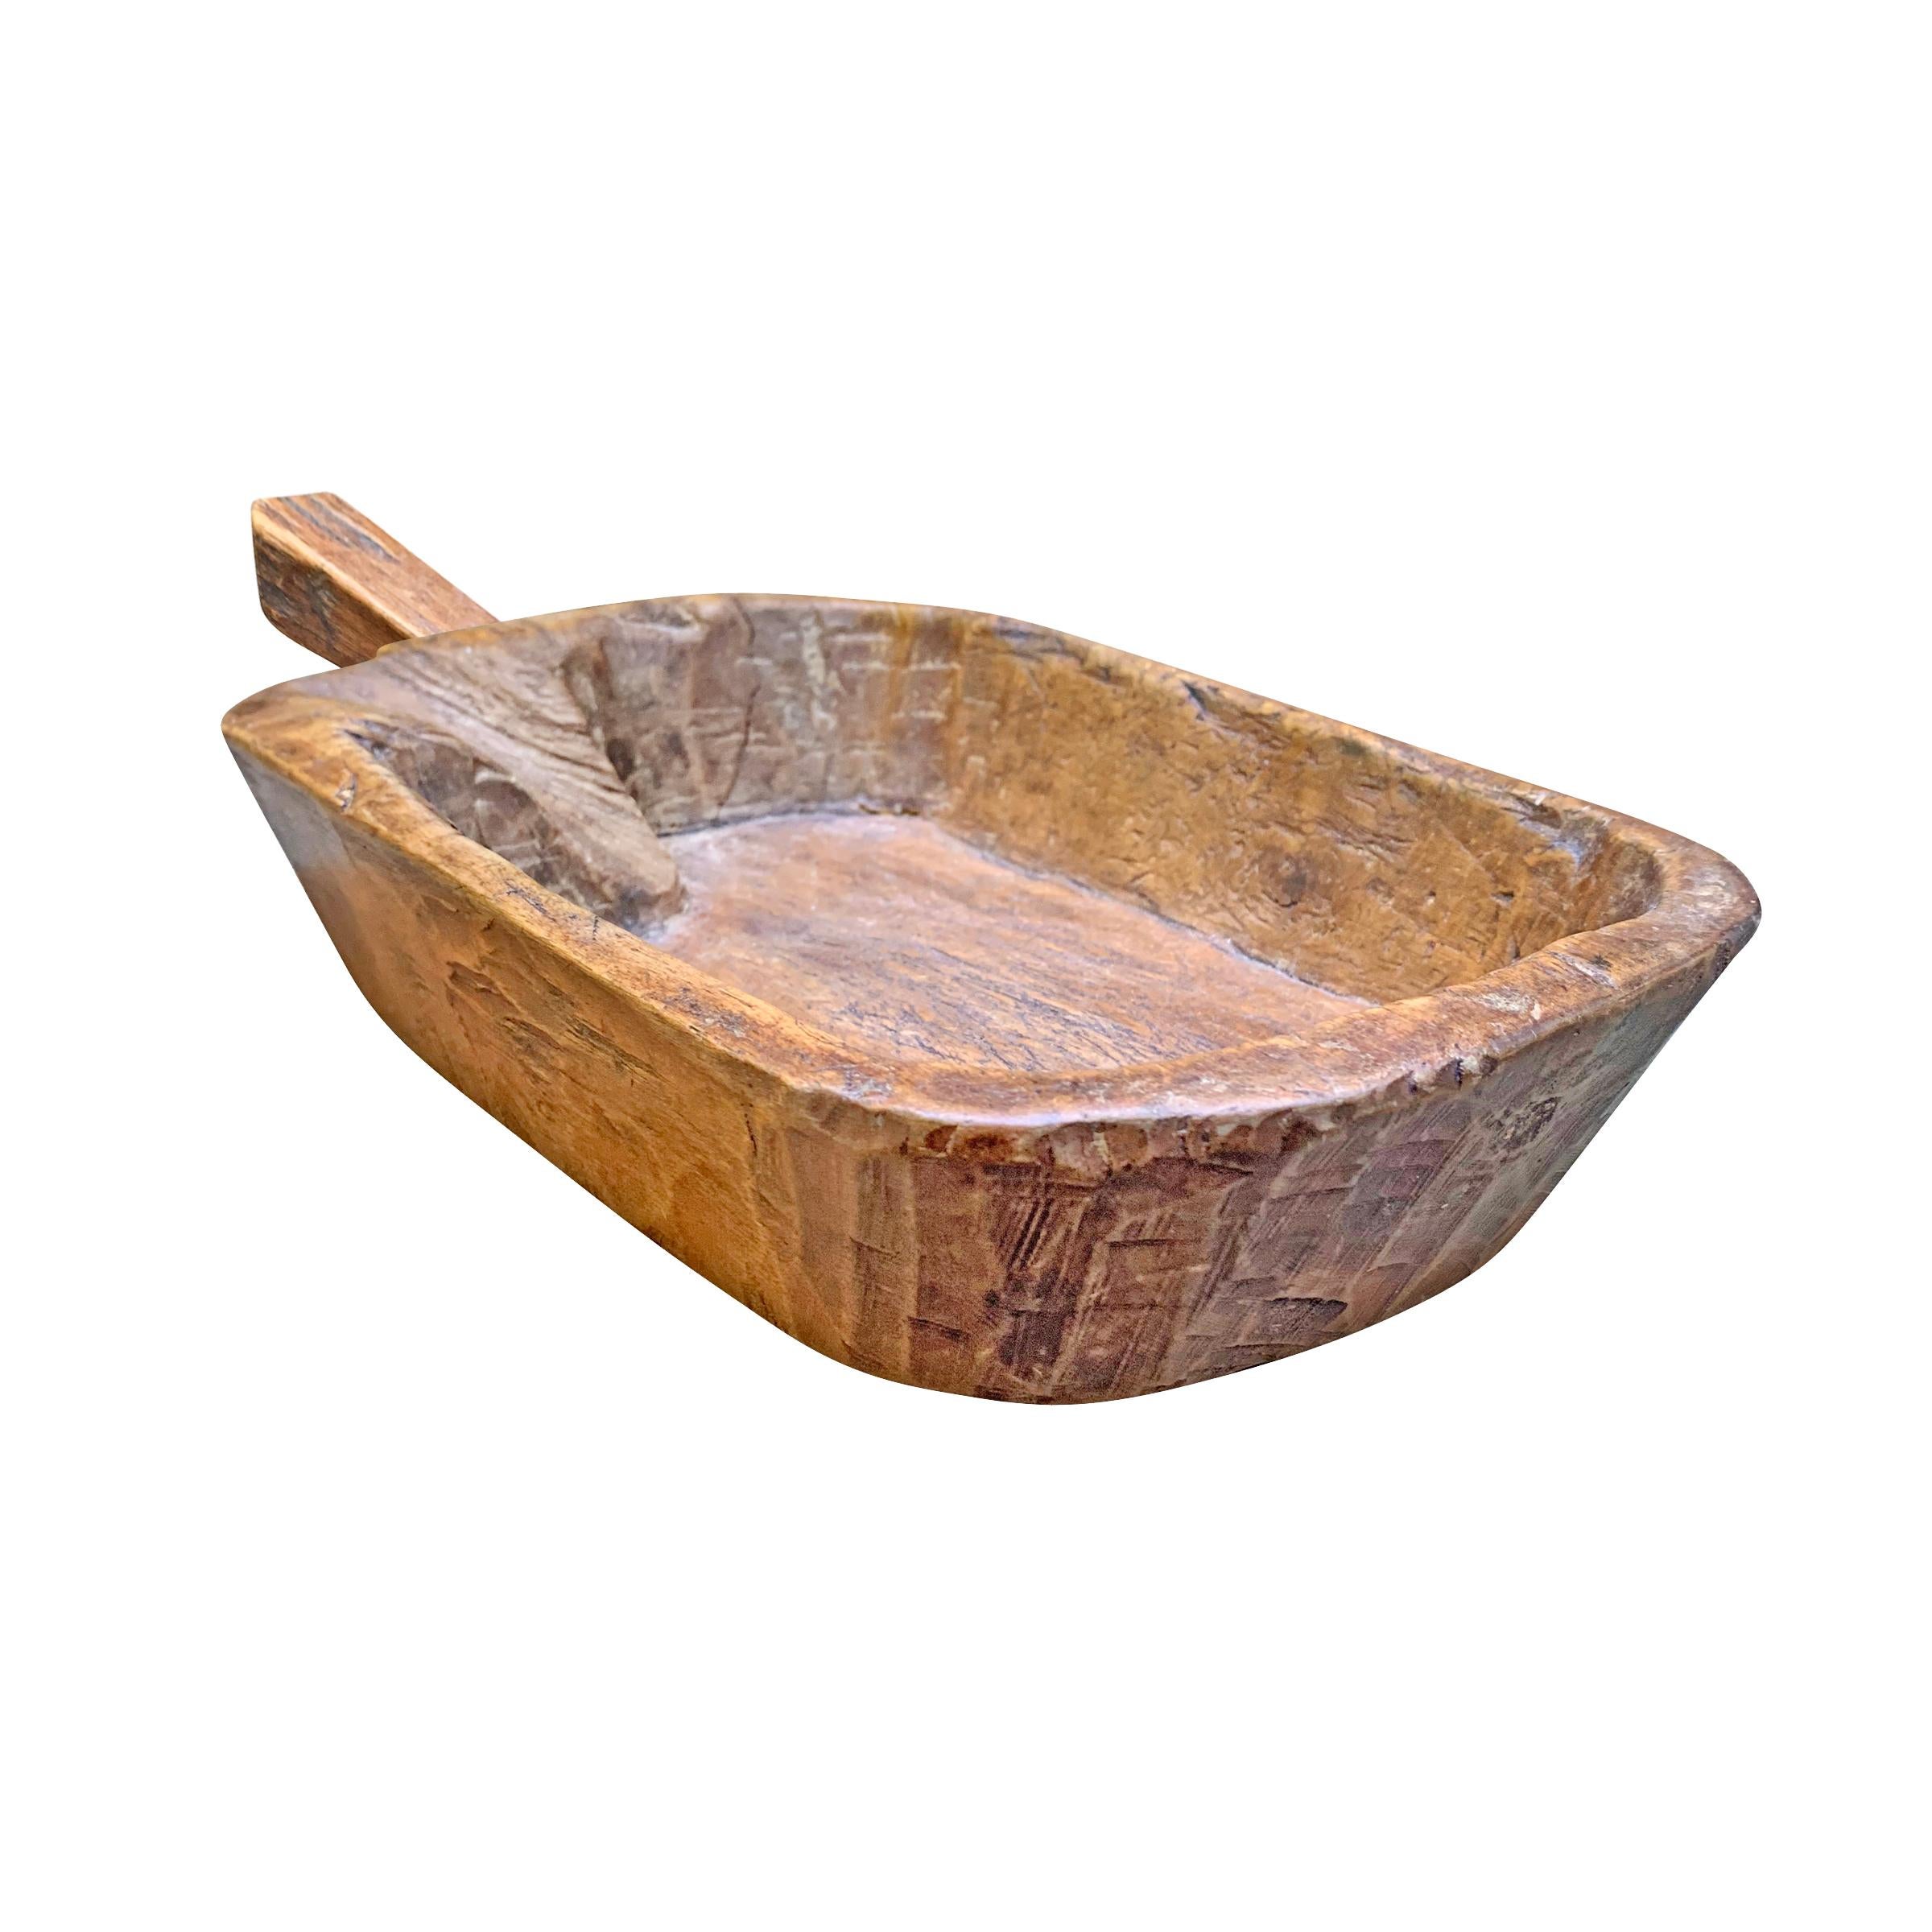 Rustic 19th Century Wooden Vessel with Handle